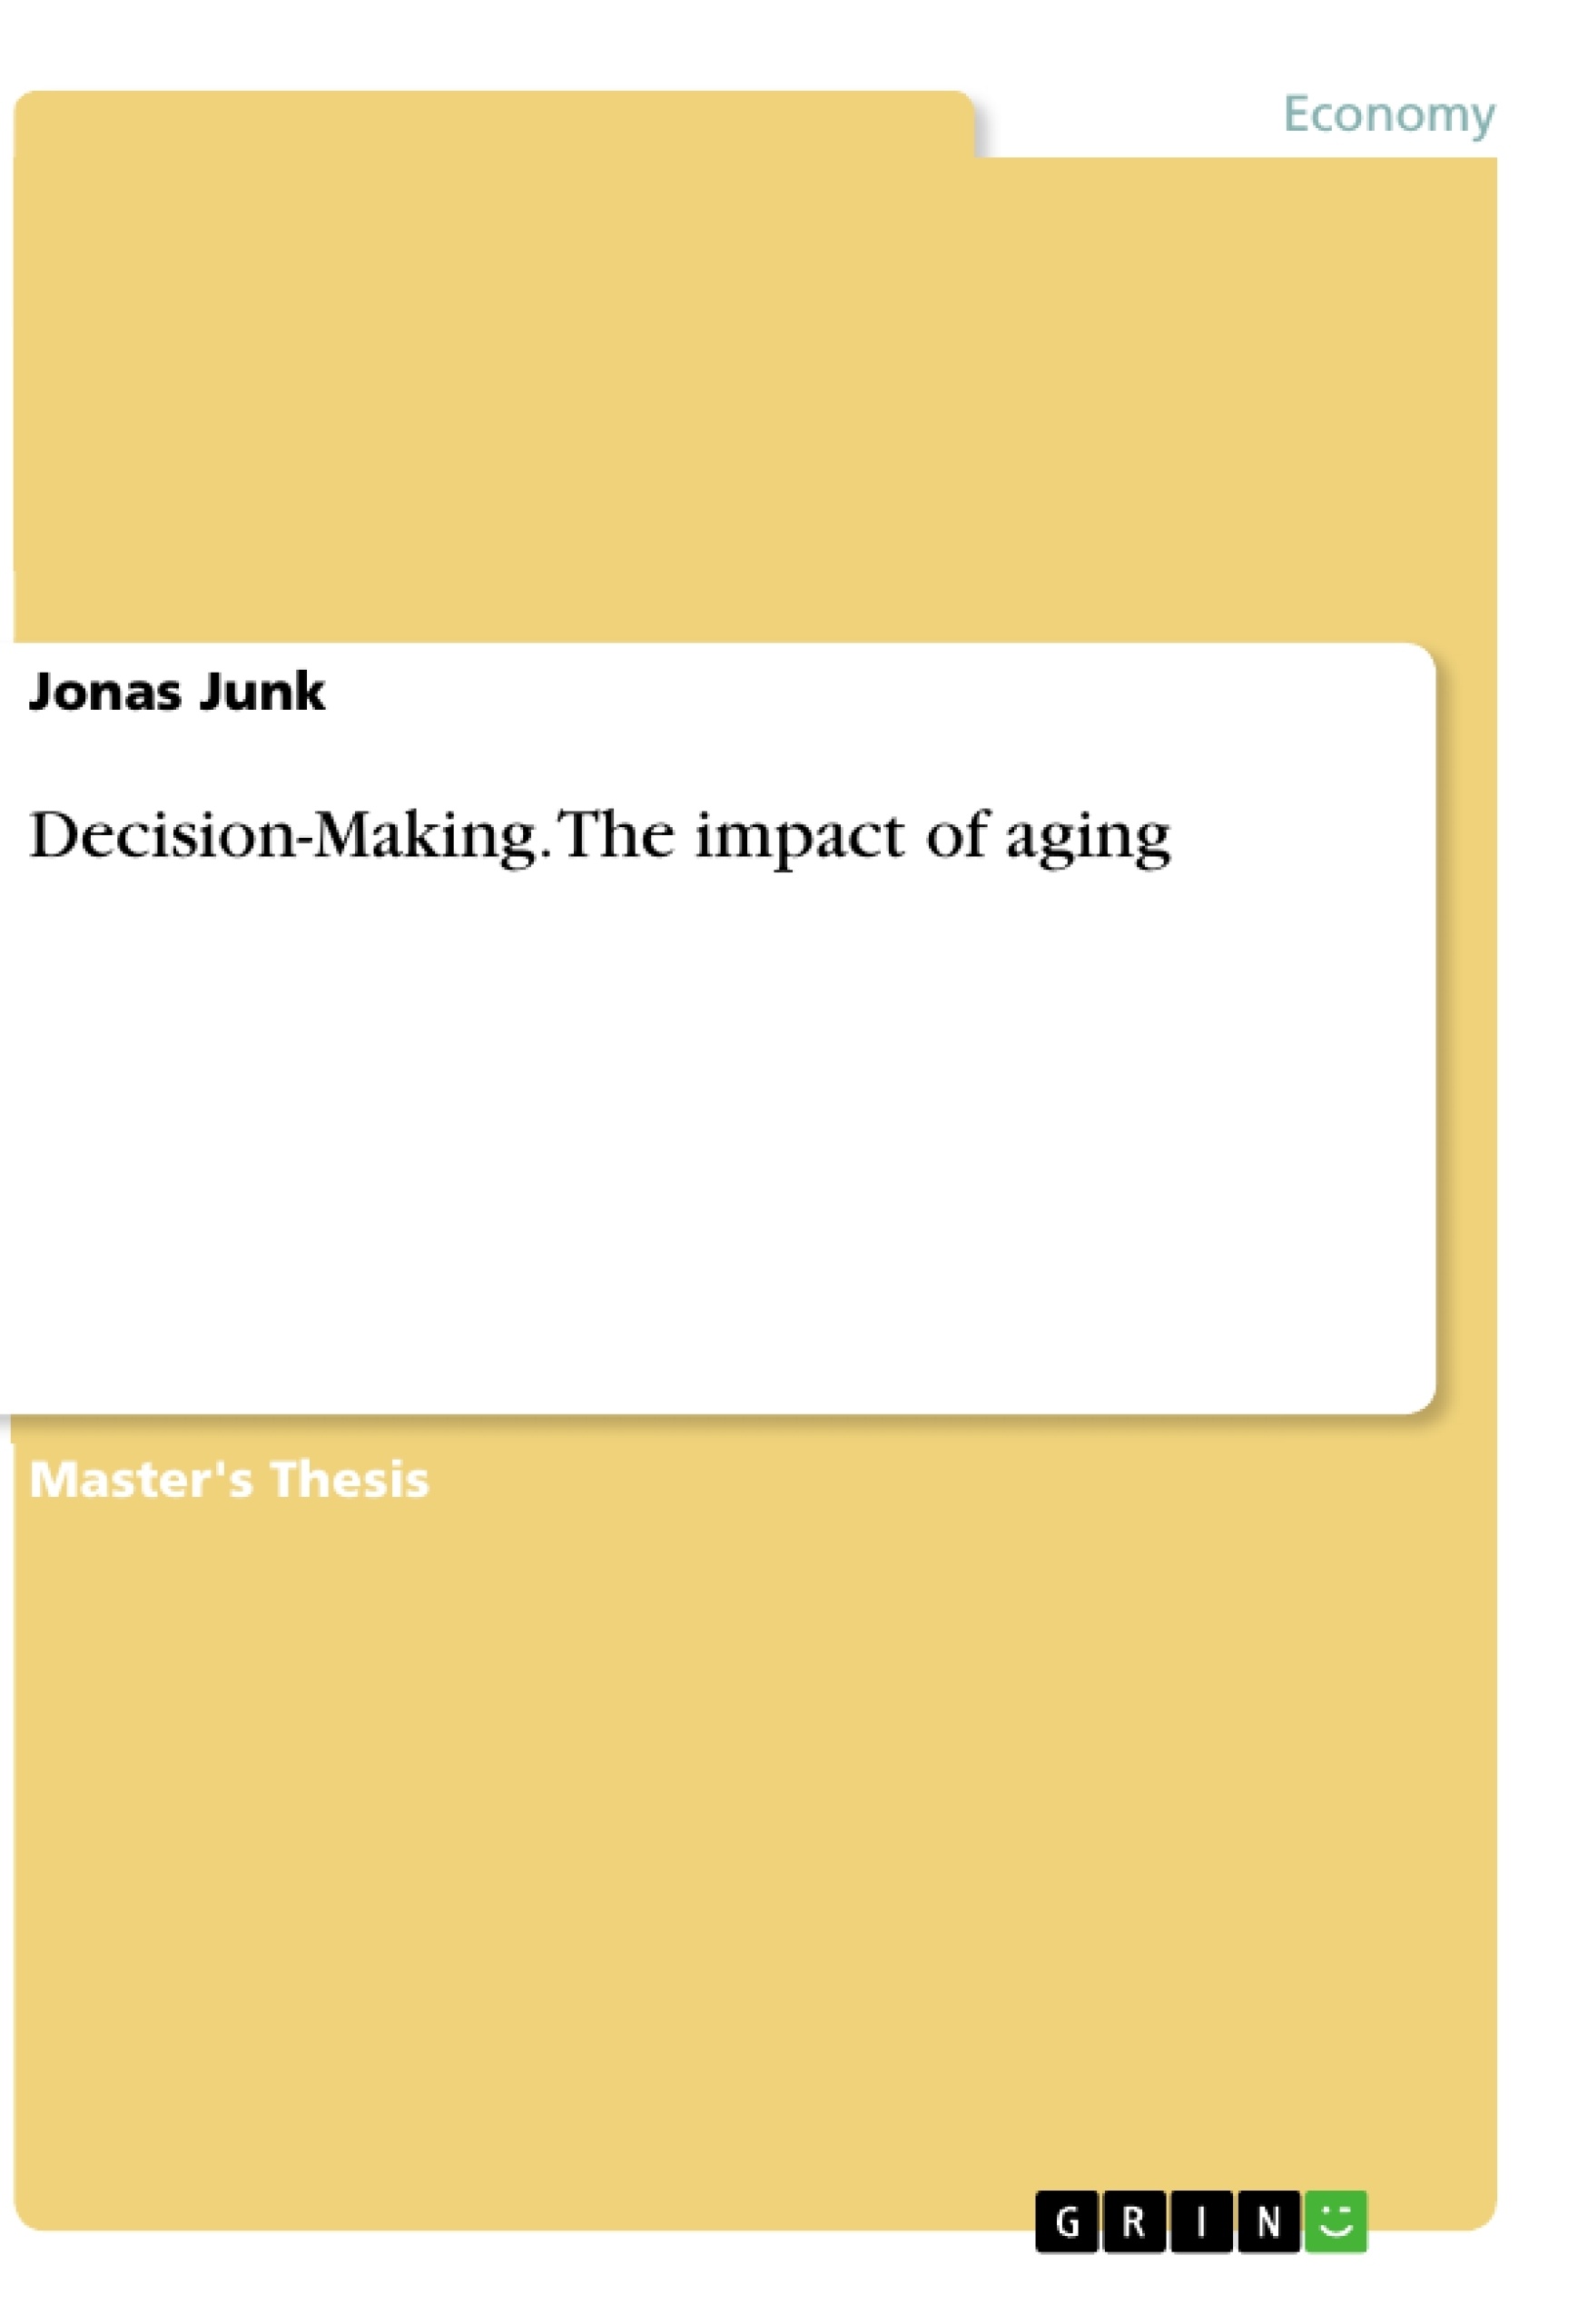 Title: Decision-Making. The impact of aging